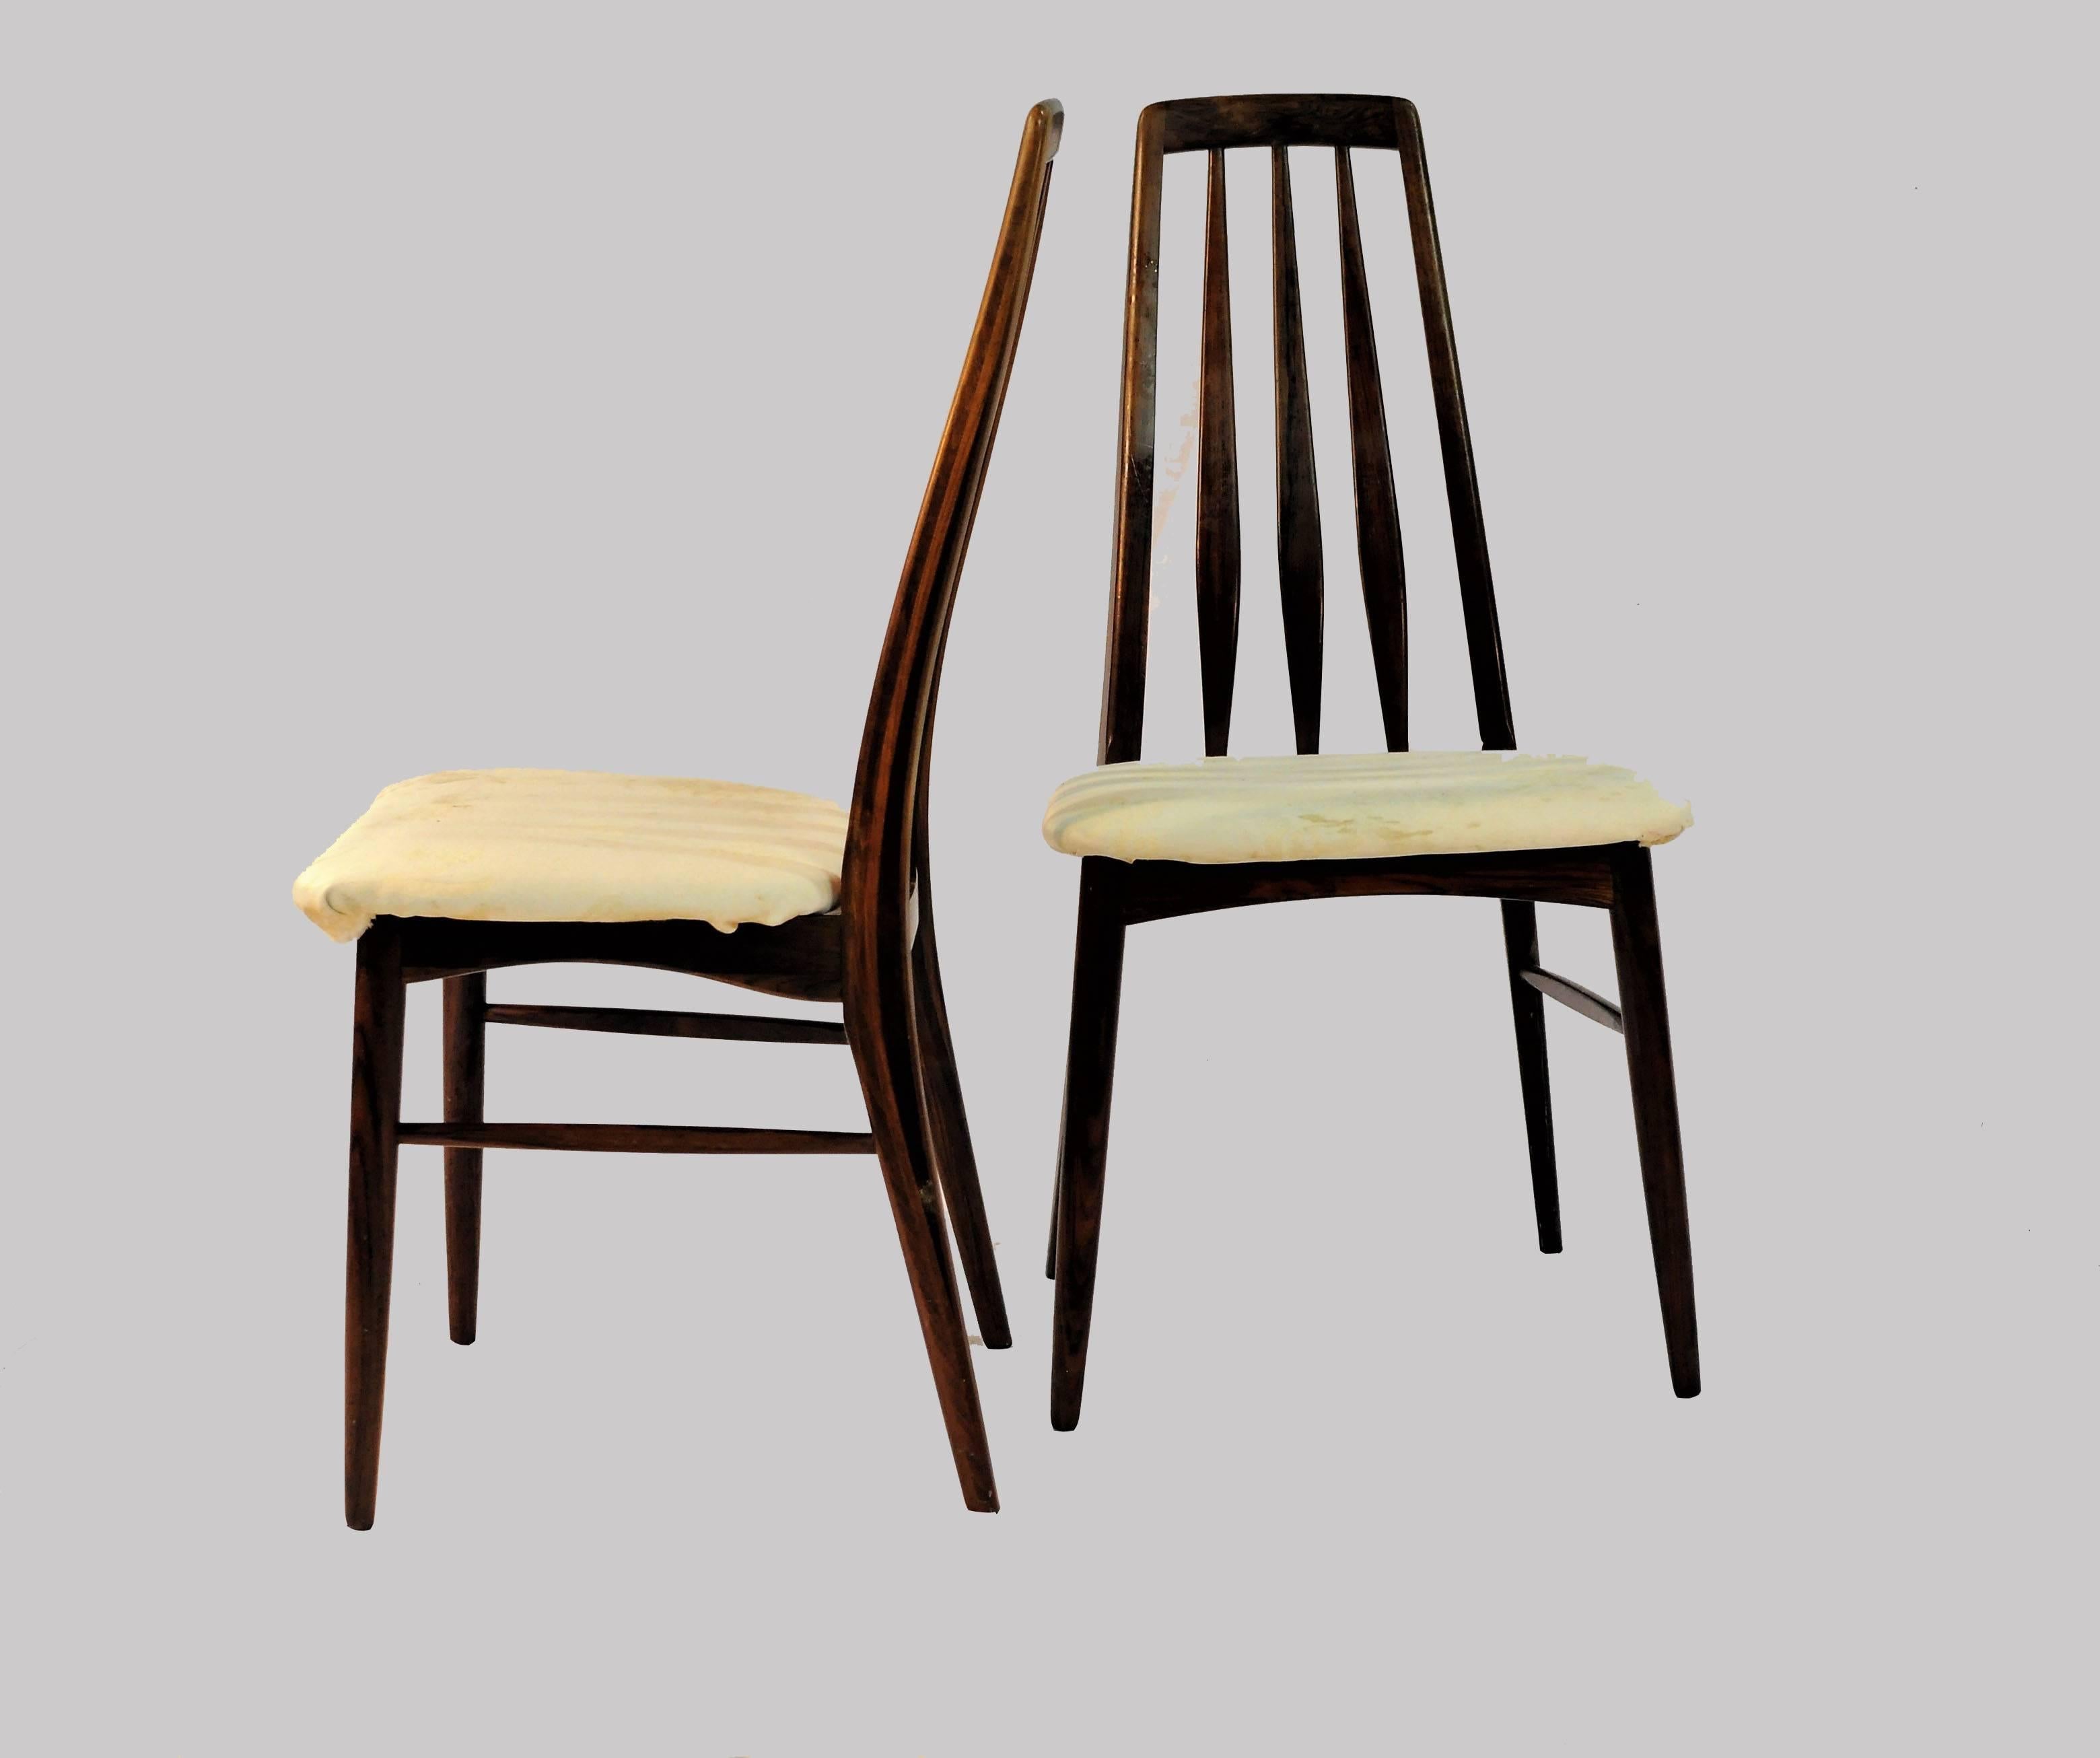 Set of six dining chairs model Eva in rosewood designed by Niels Koefoed for Koefoeds Møbelfabrik Hornslet

Frames of the chairs have been overlooked and refinished by our cabinetmaker and are in very good condition.

Seats will be reupholstered